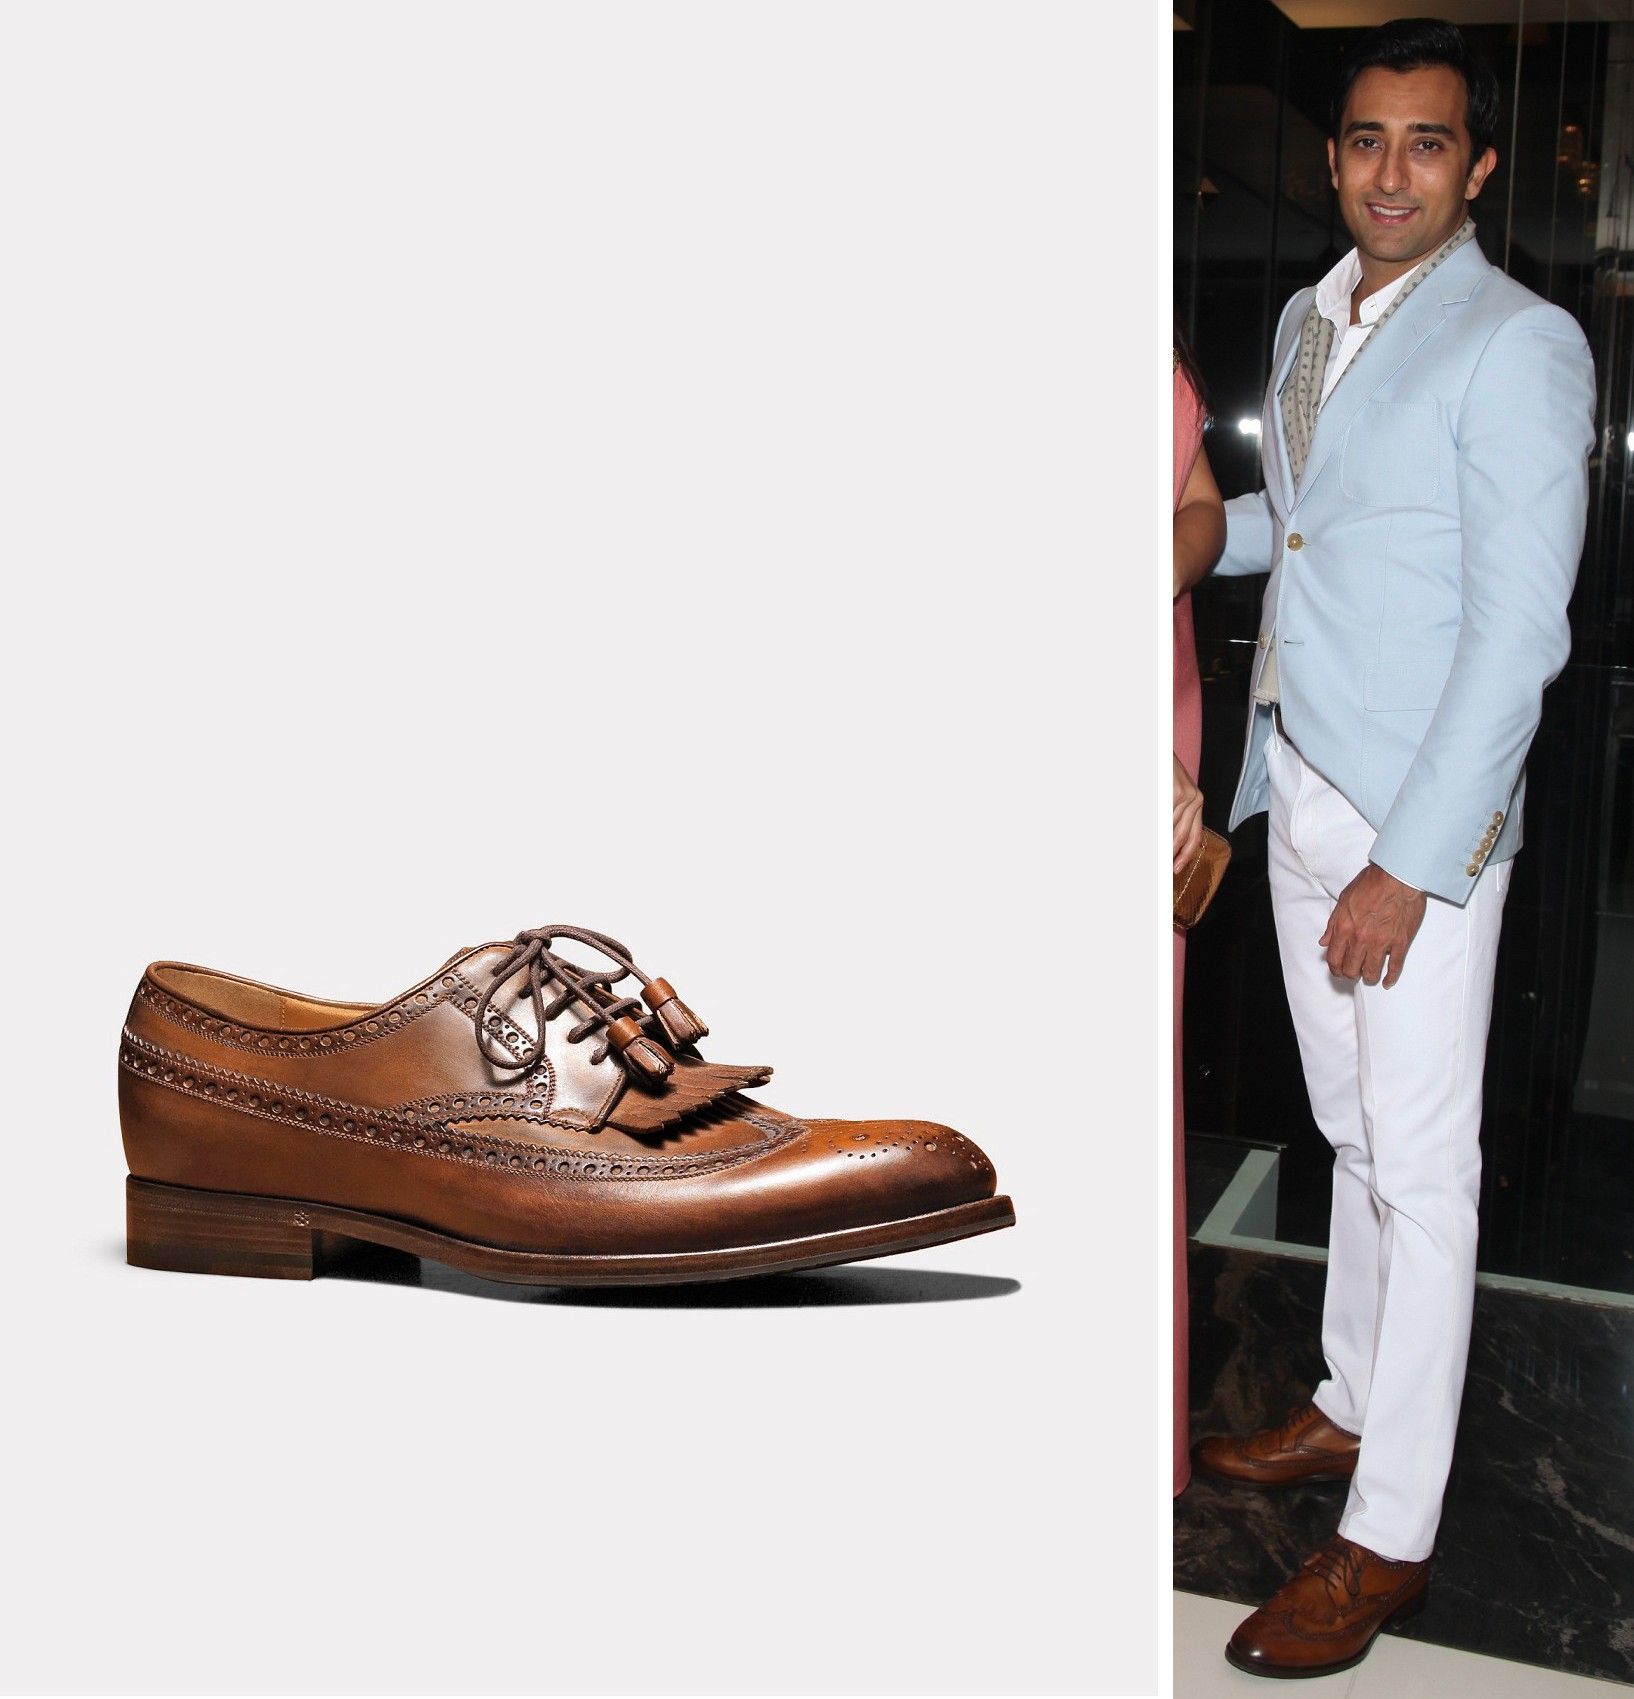 Rahul Khanna in Gucci brown oxford brogues with tassel detail at the Gucci store opening in The Oberoi, Gurgaon (Photo courtesy | Gucci)